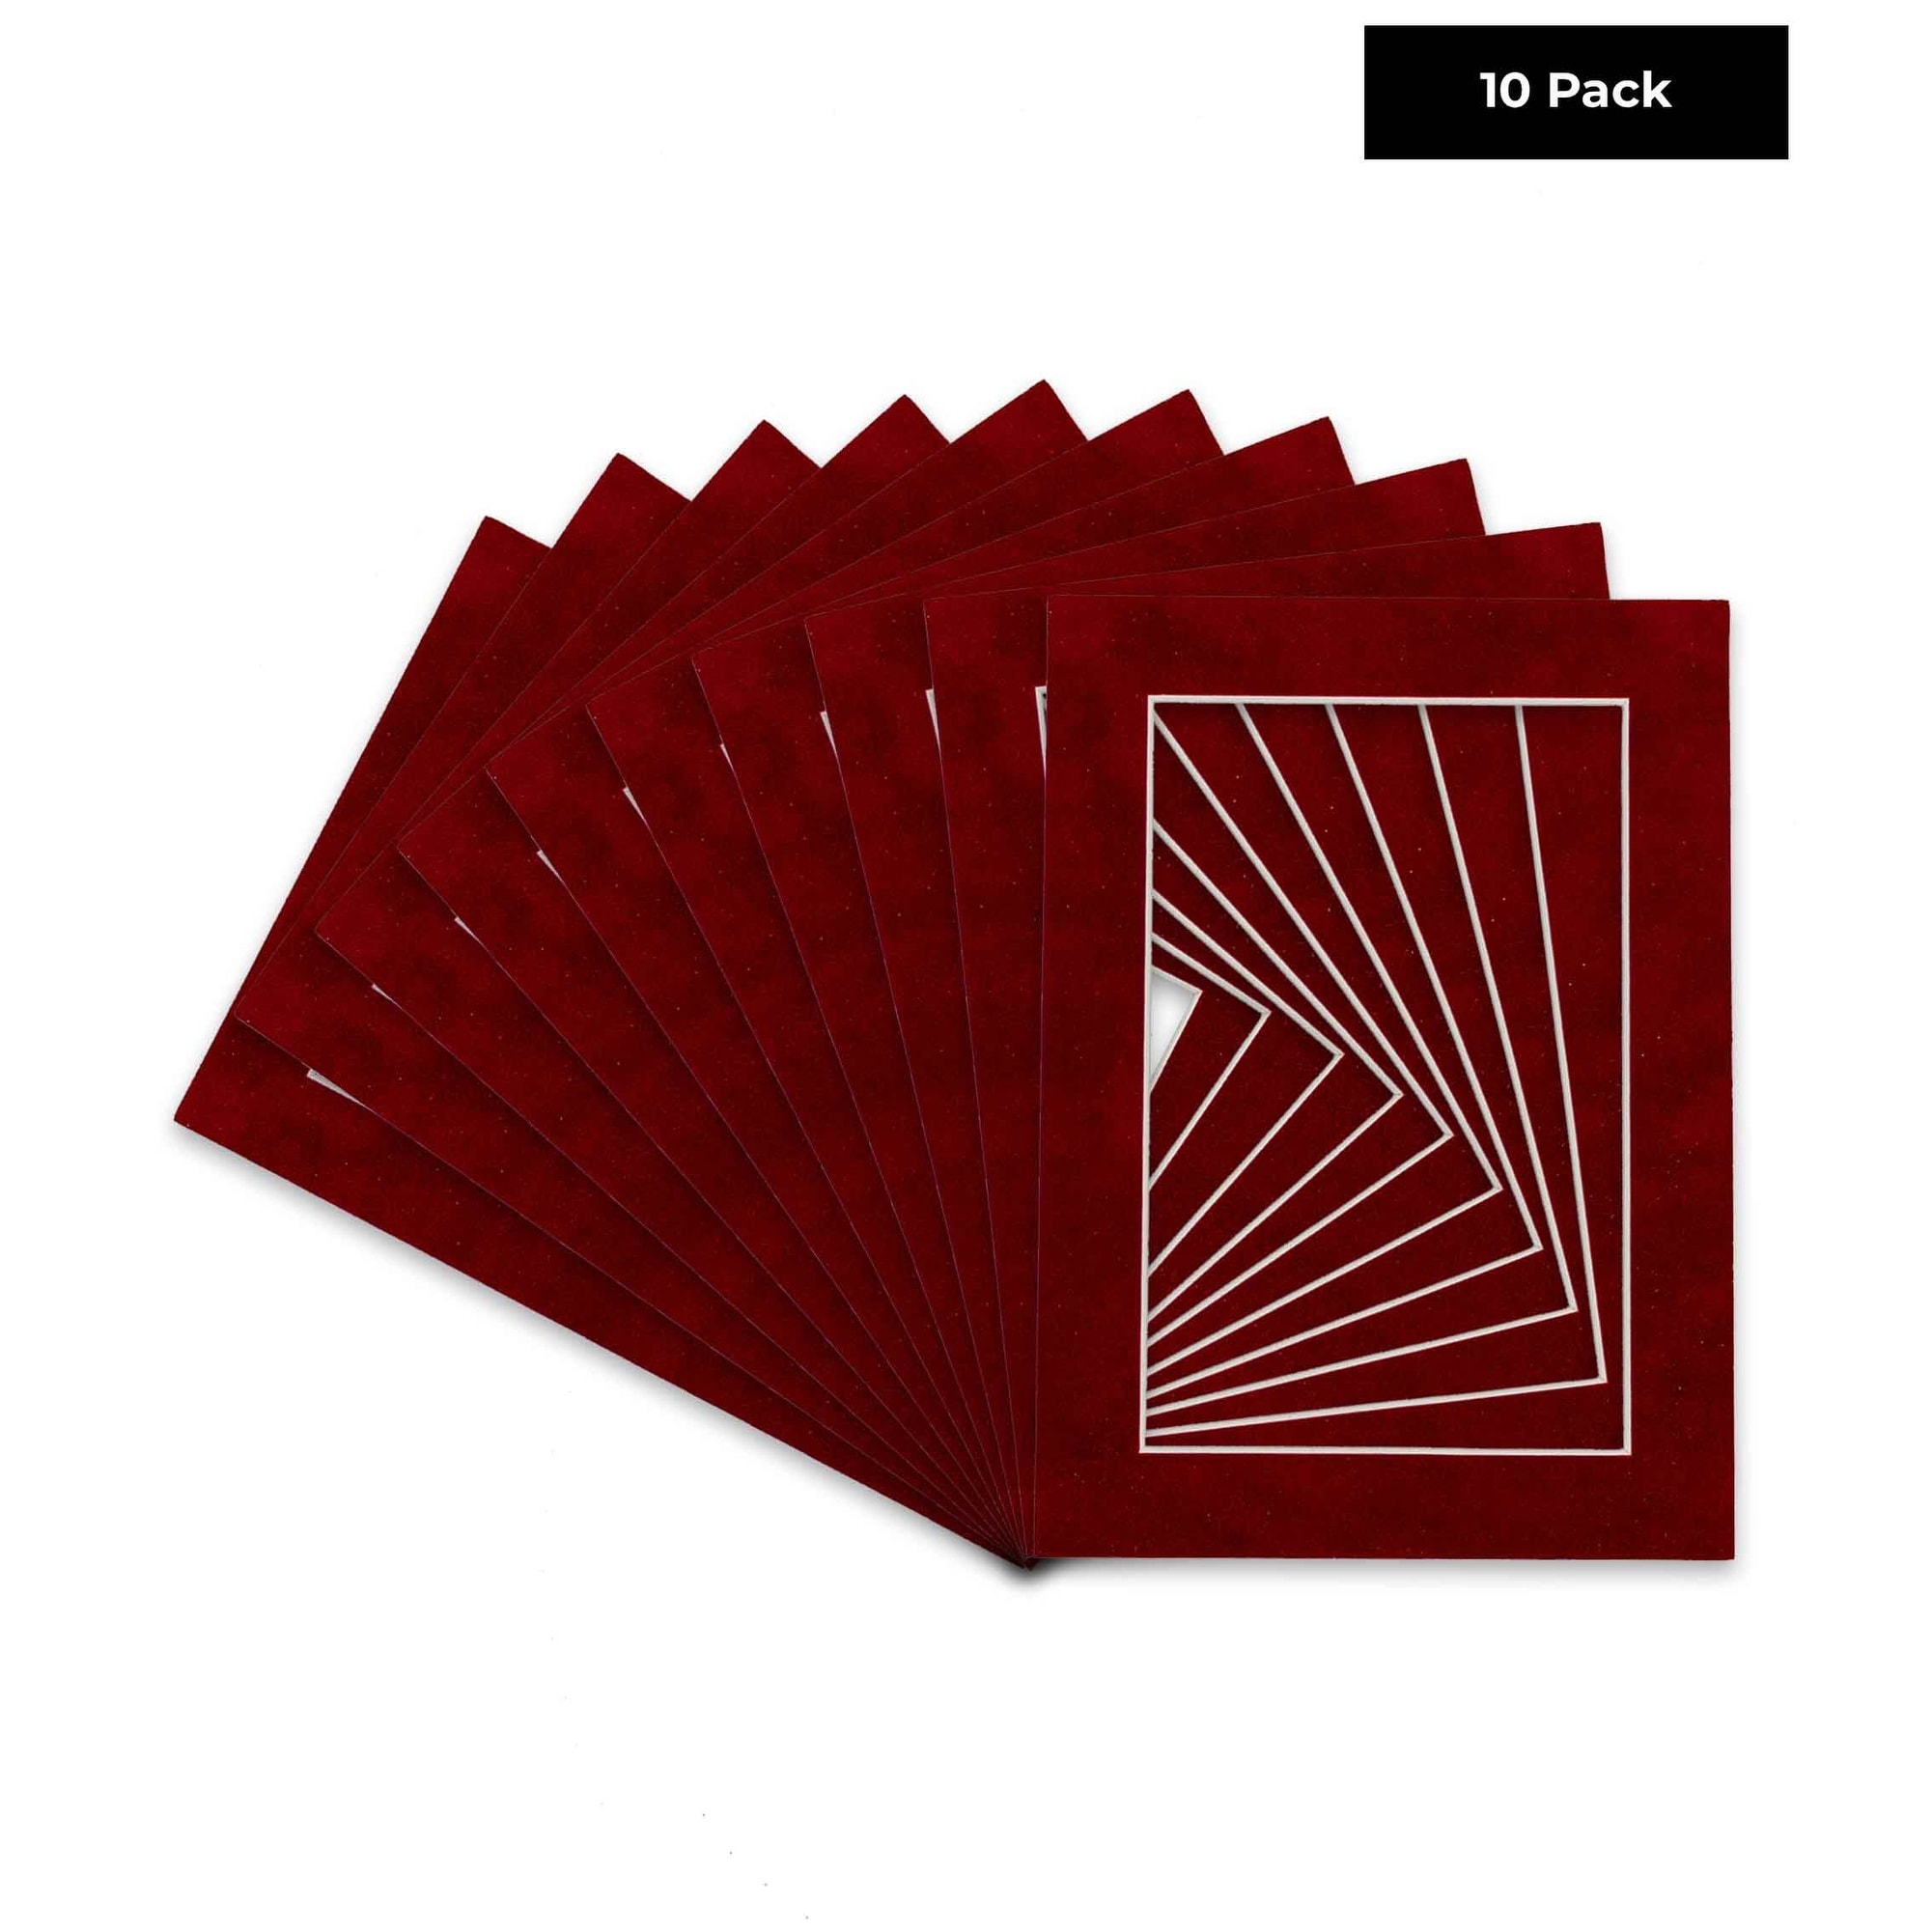 Pack of Ten 8x12 Mats Bevel Cut for 6x10 Photos - Acid Free Bright Red Suede Precut Matboards for Pictures, Photos, Framing